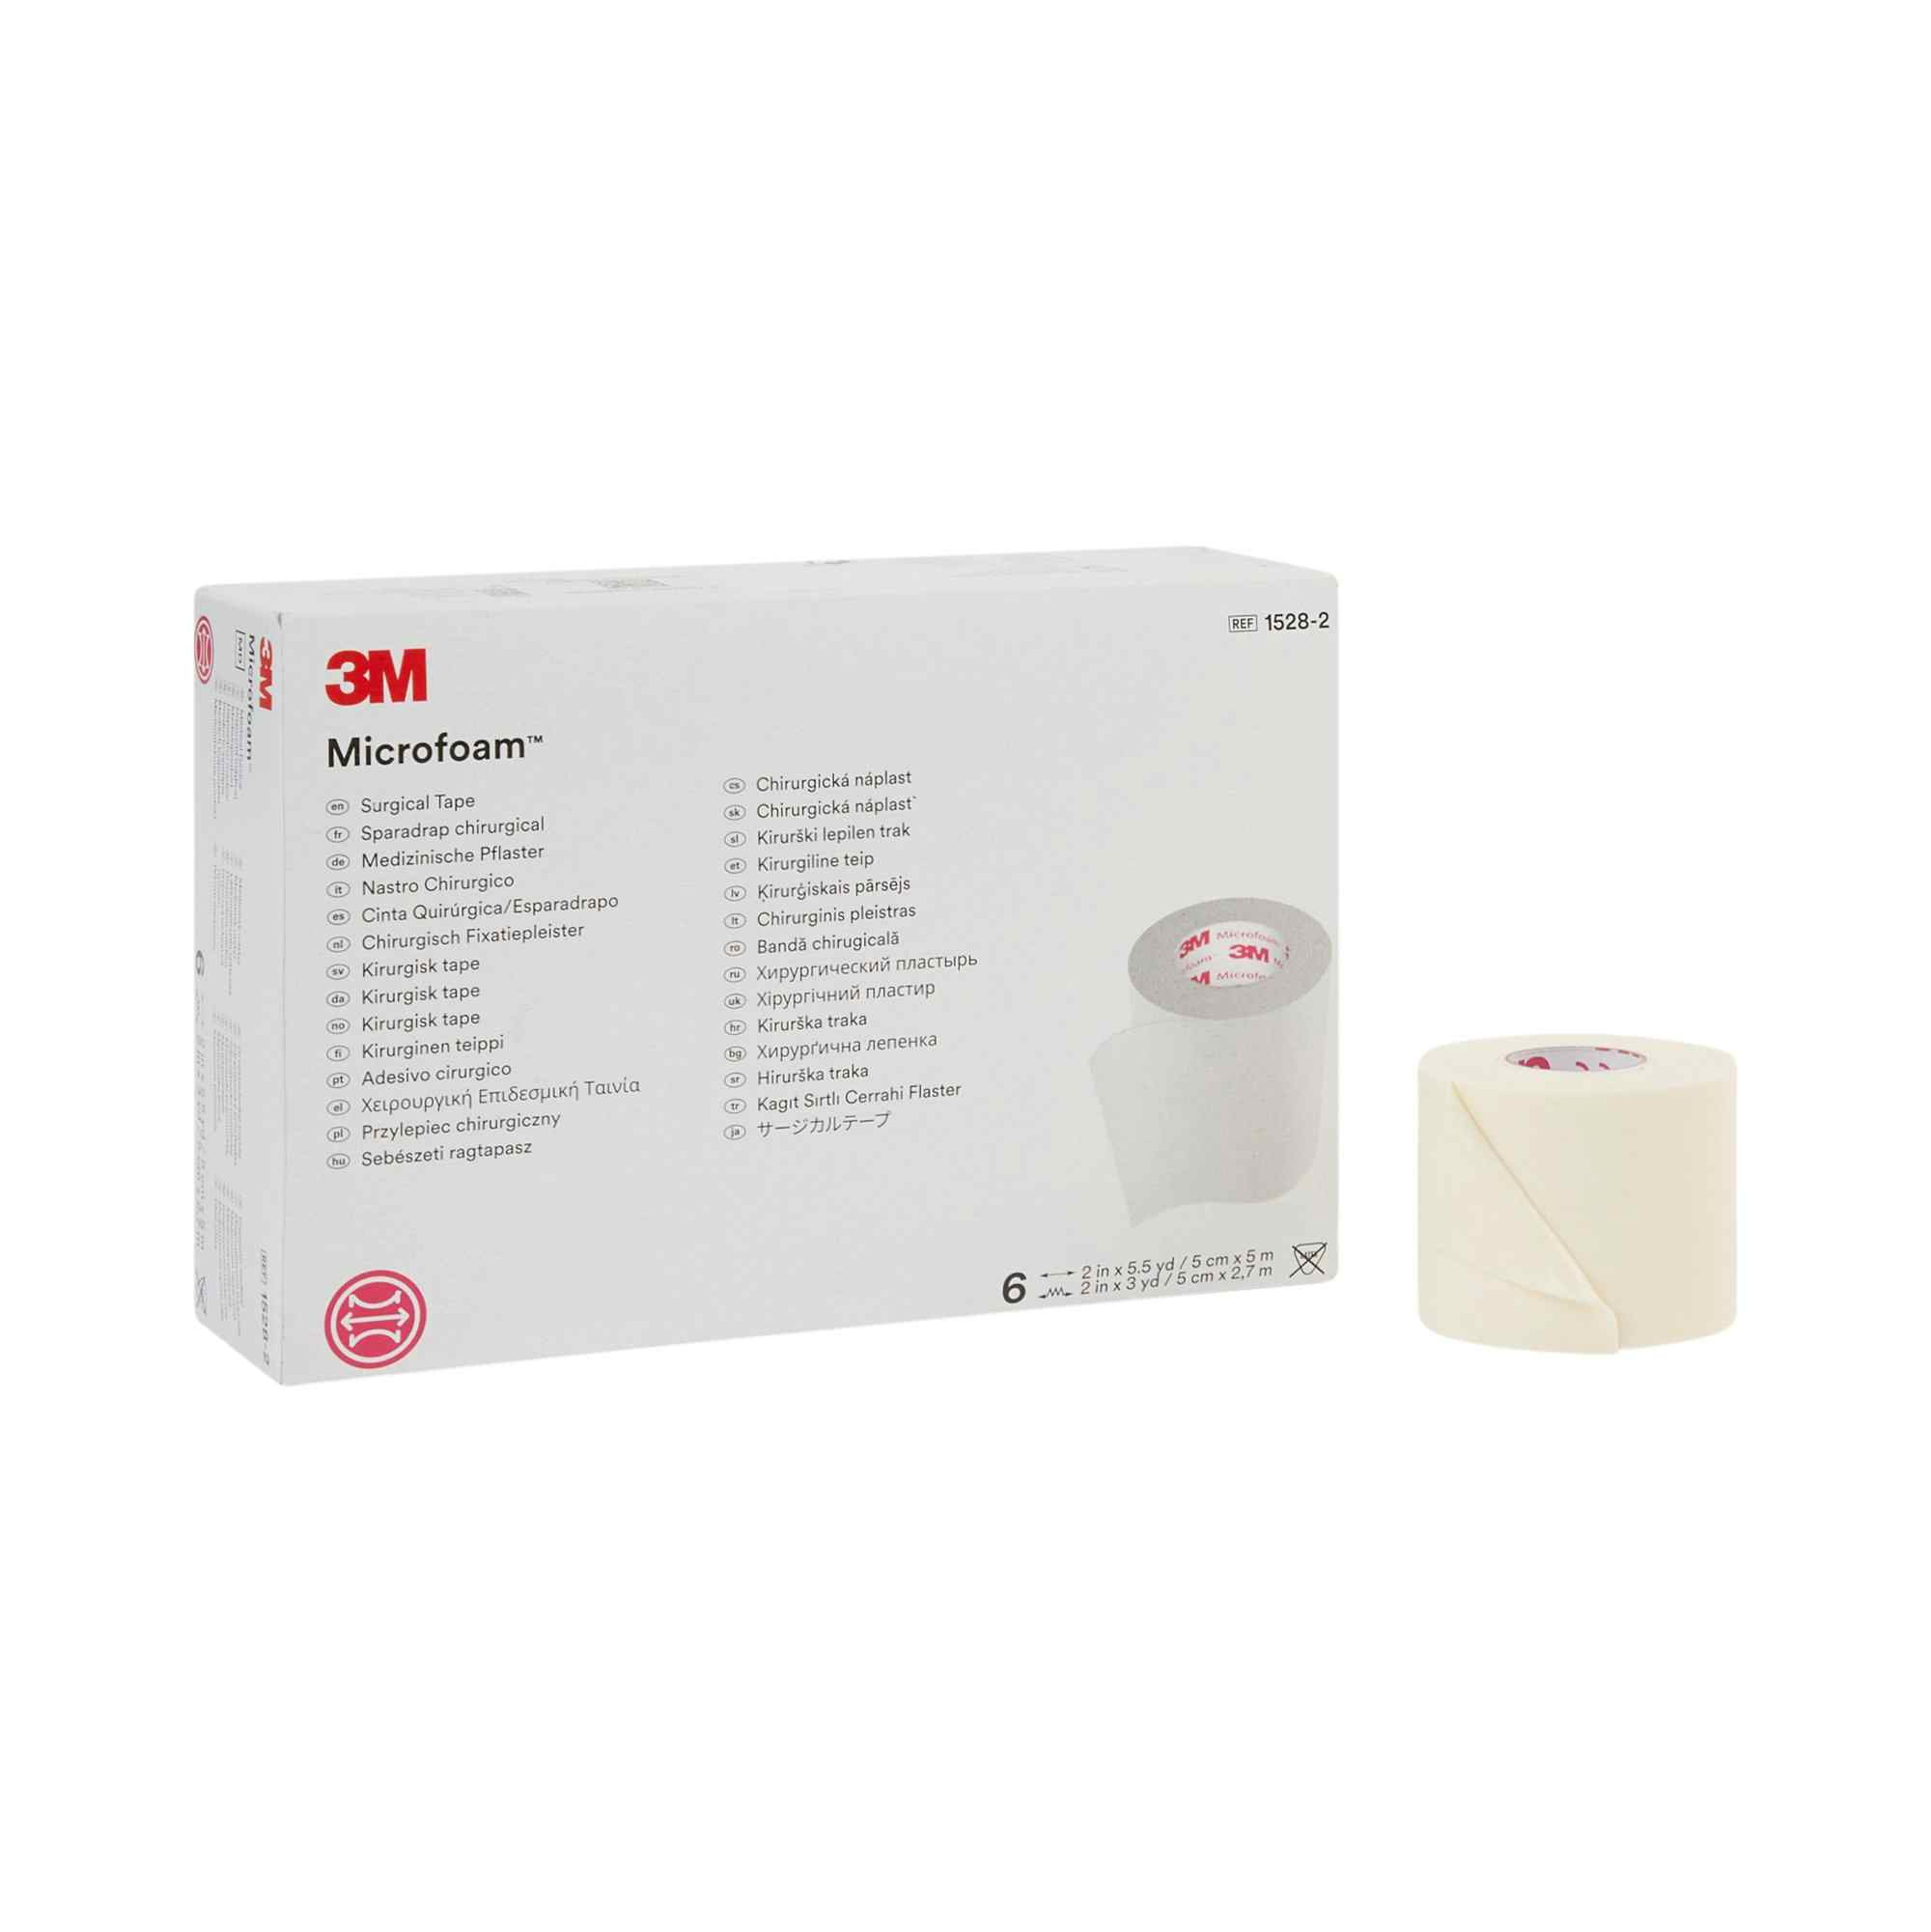 3M Microfoam Surgical Tape, Water-Resistant, Foam/Acrylic Adhesive, Elastic, 2 Inch X 5½ Yard, White, 1528-2, Box of 6